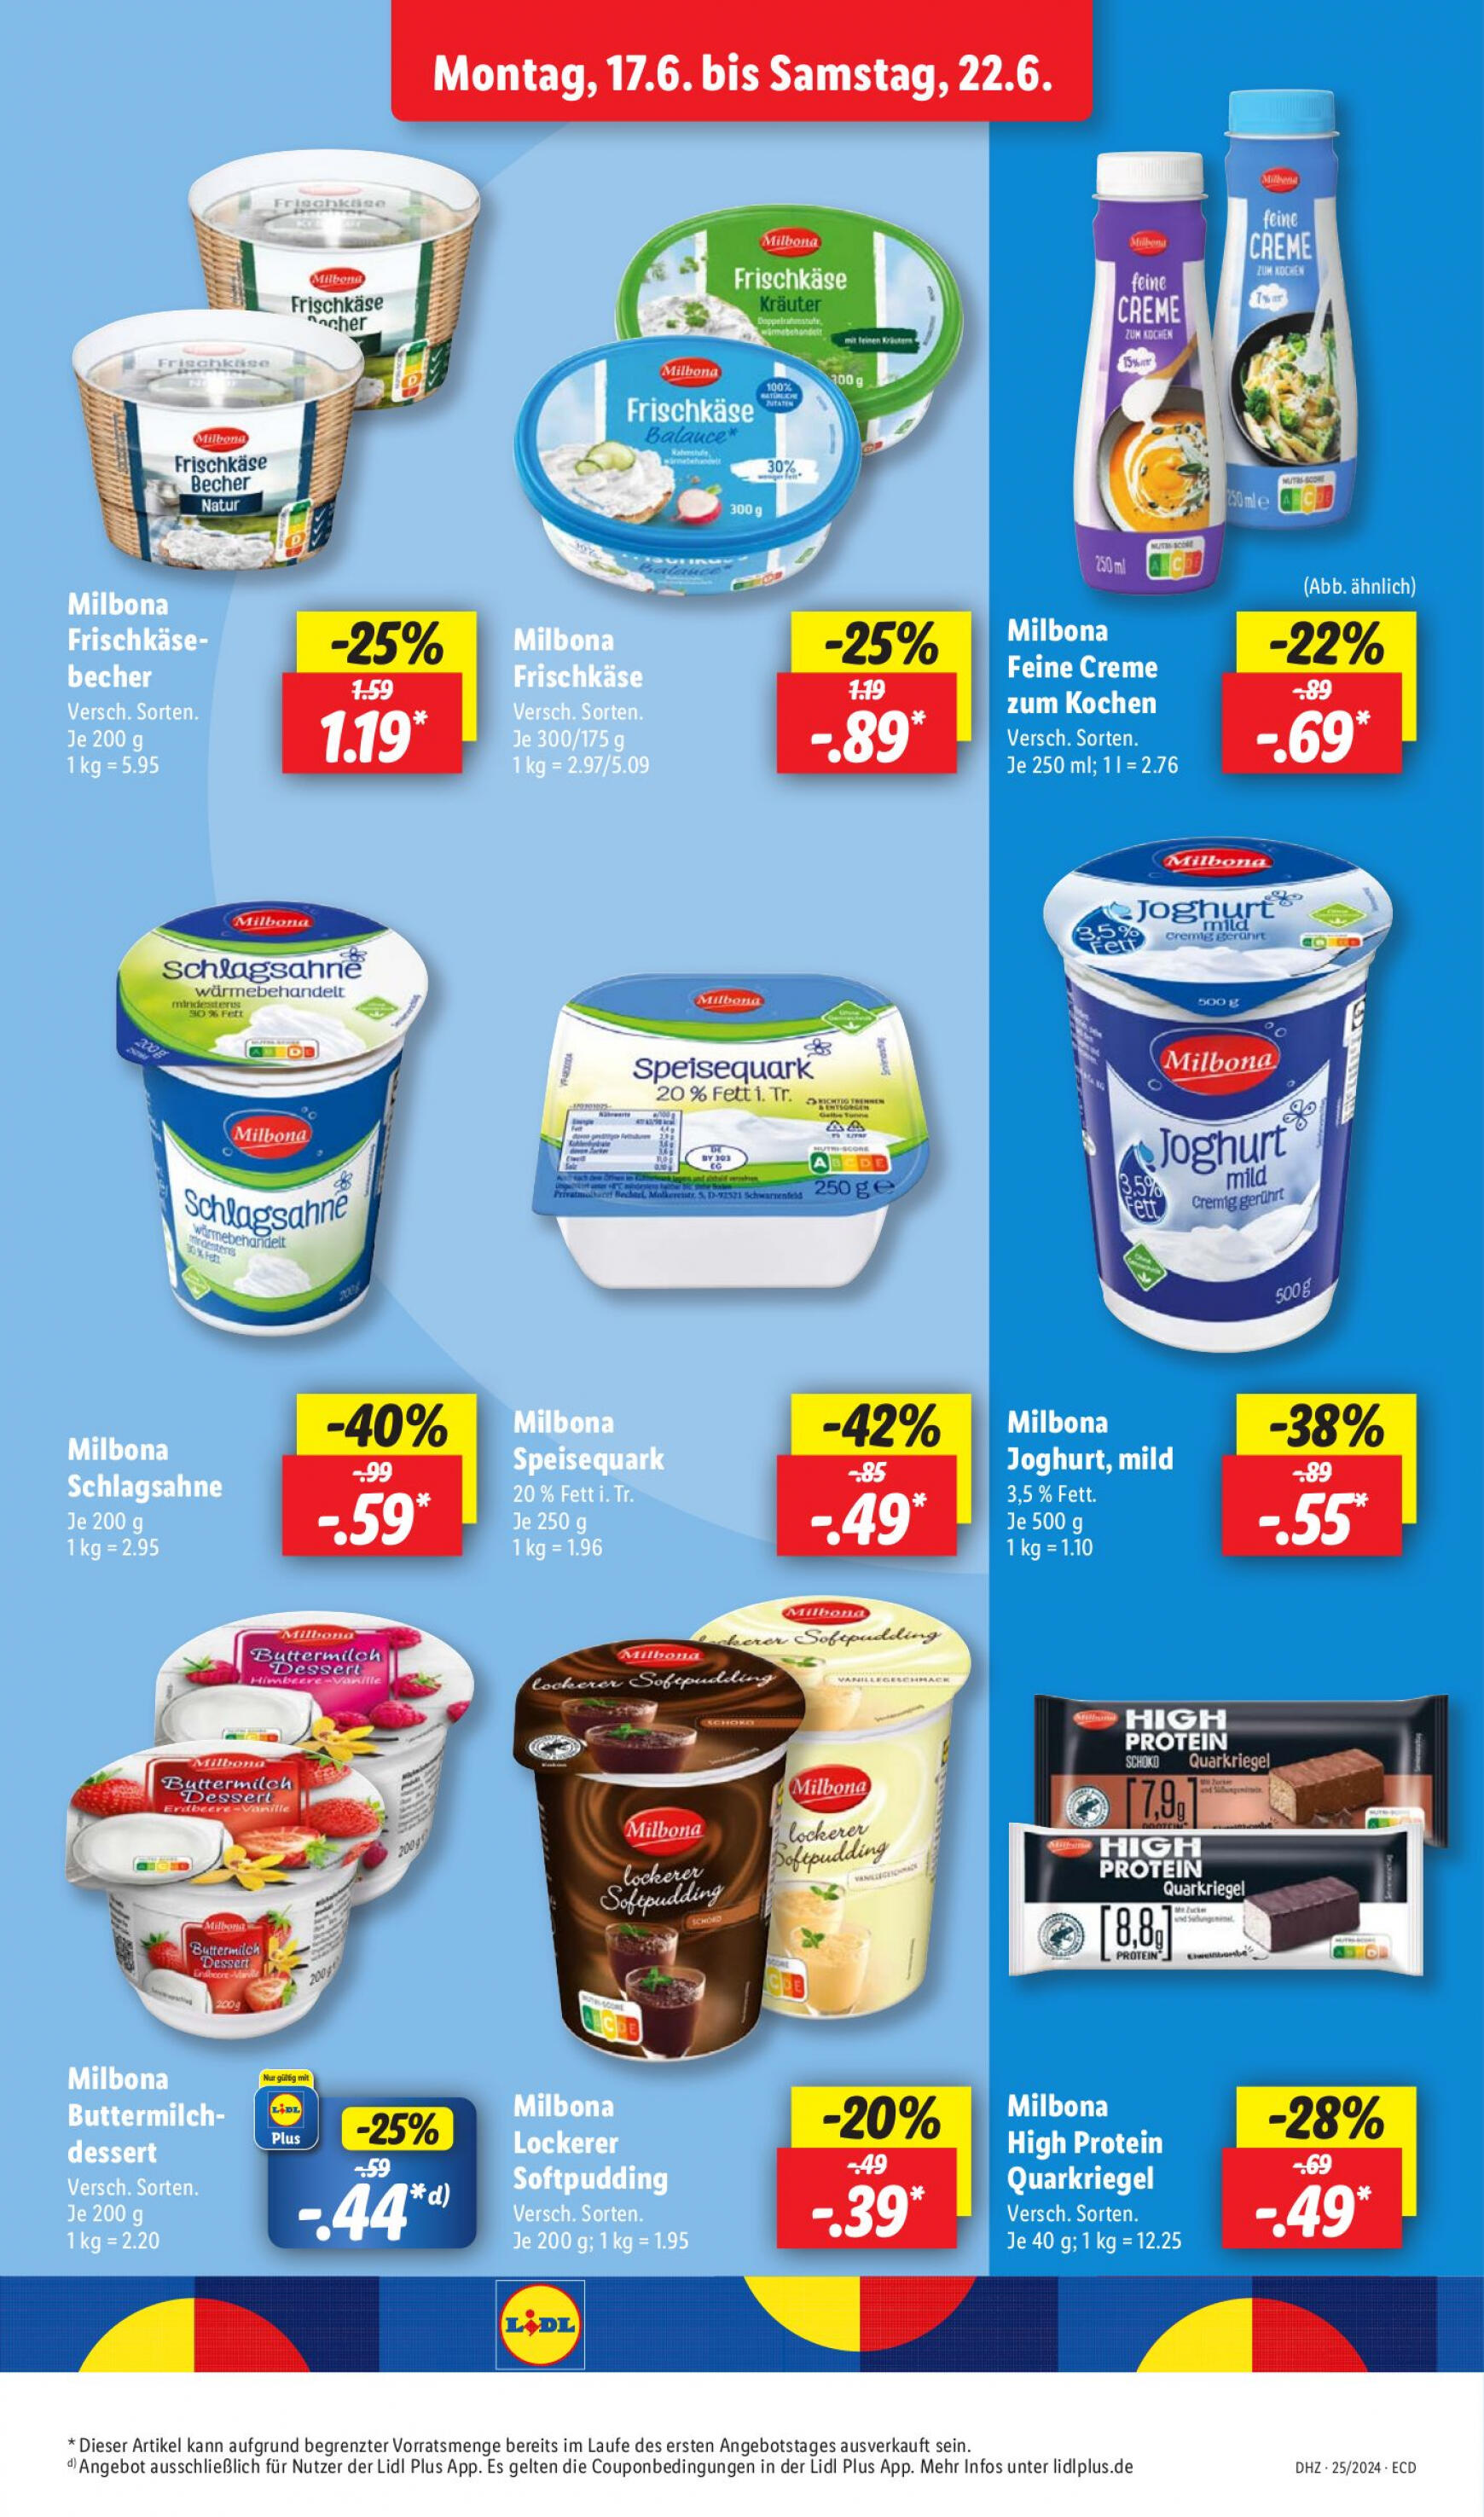 lidl - Flyer Lidl aktuell 17.06. - 22.06. - page: 9